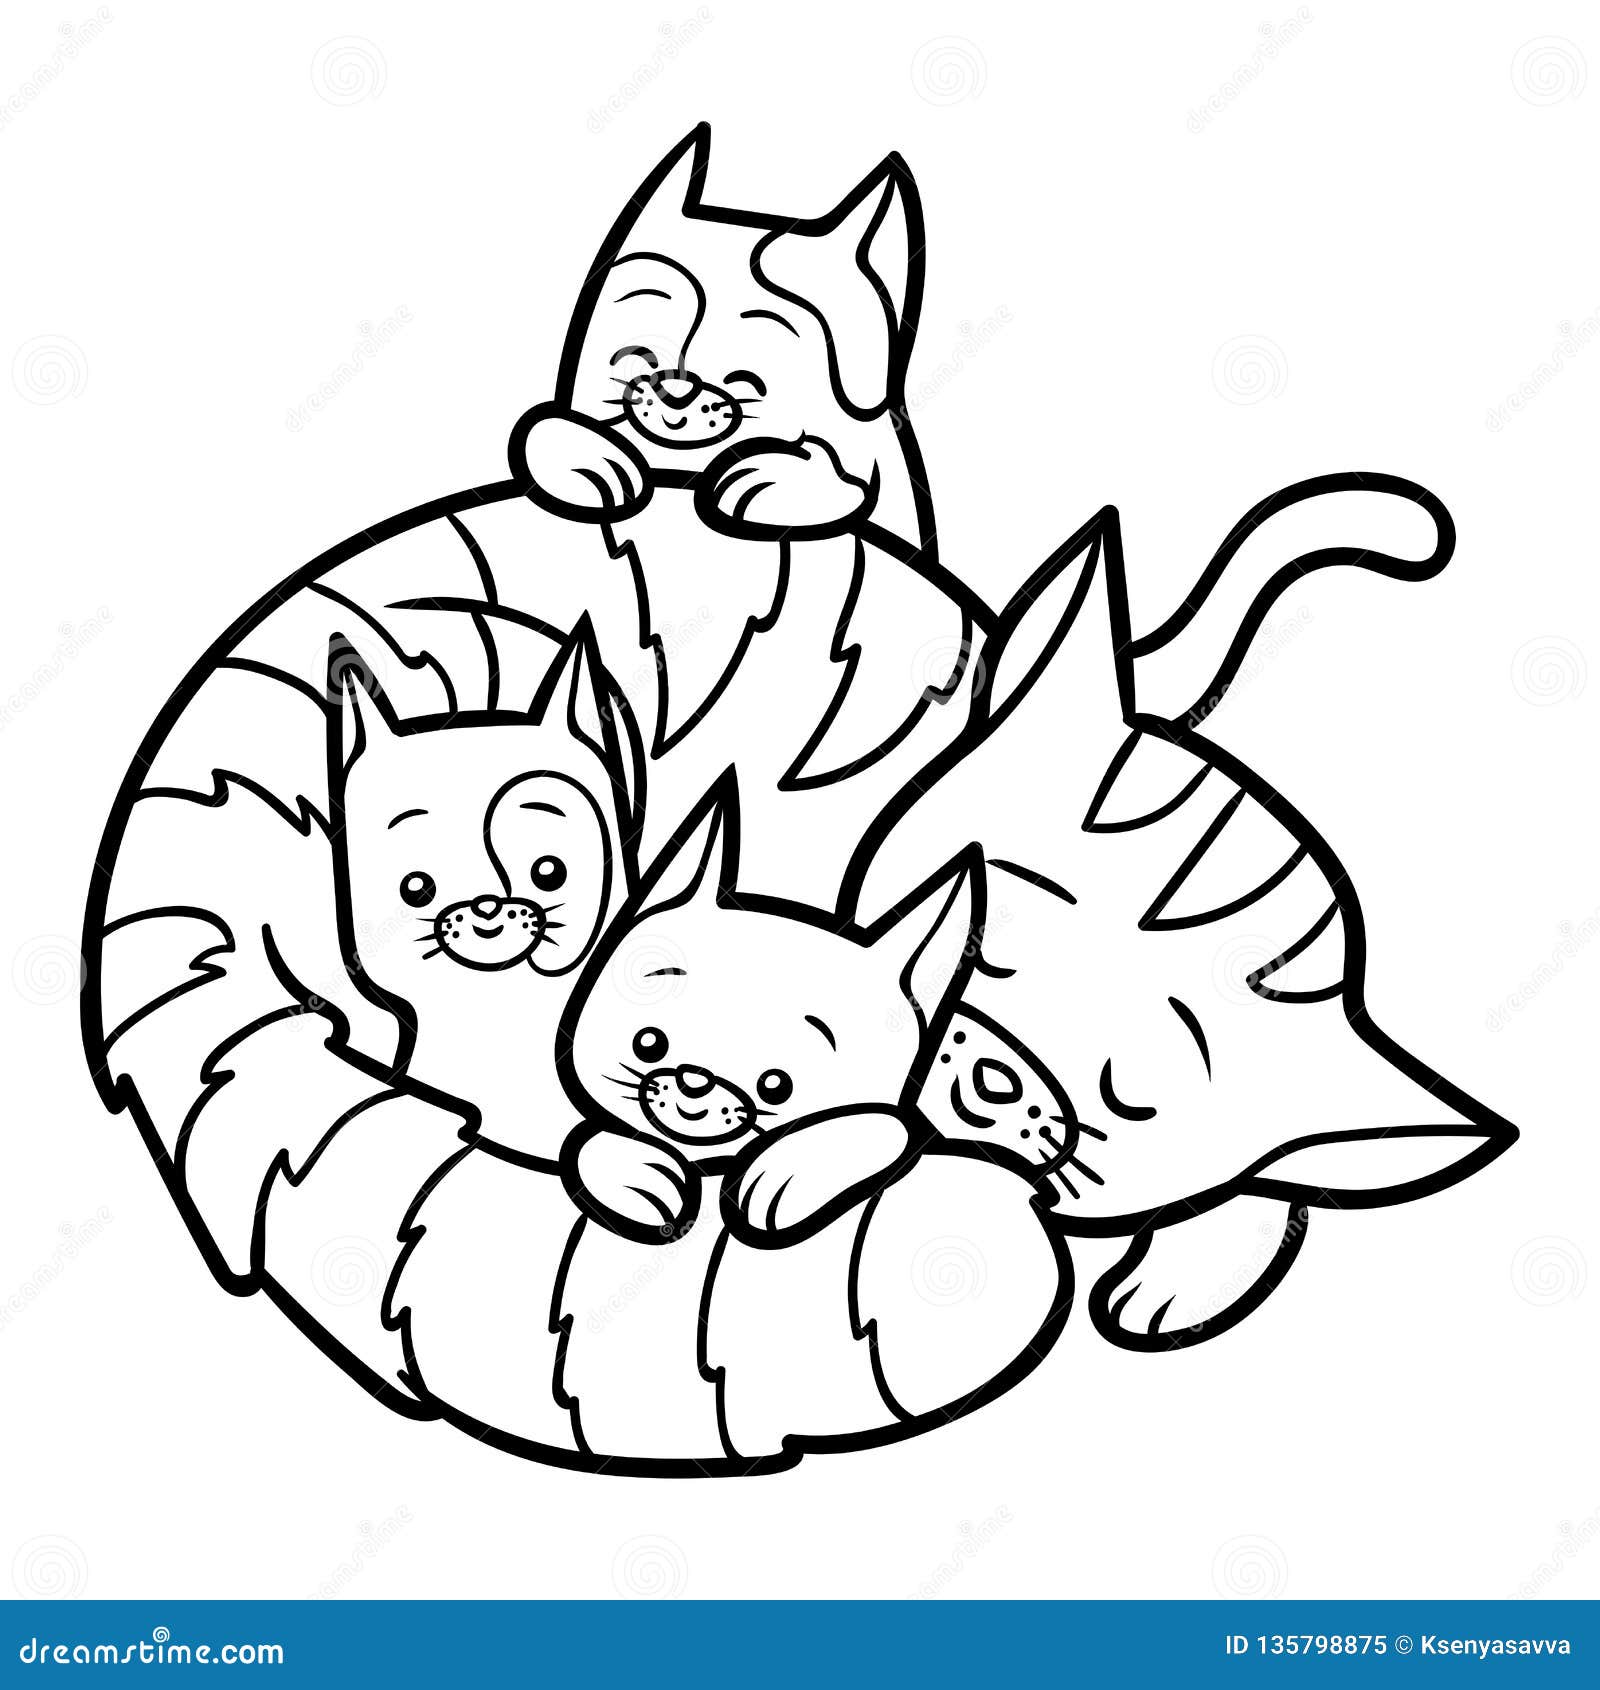 Coloring book, Four cats stock vector. Illustration of game ...